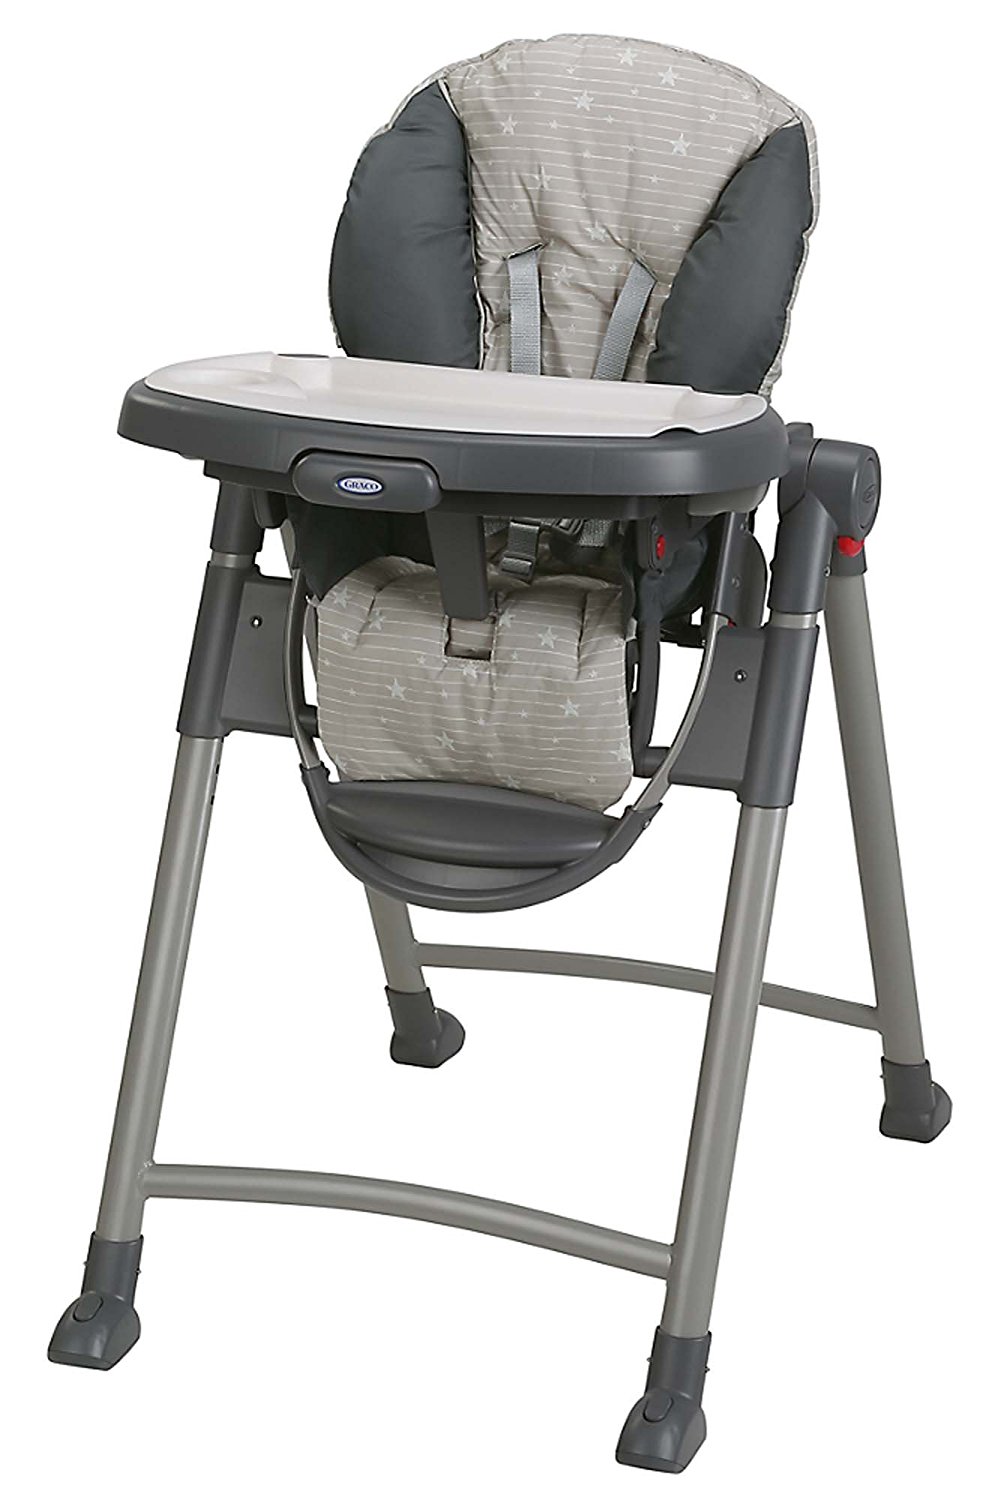 Prime Day Deal – Graco Contempo Highchair in Stars – Just $59.69!